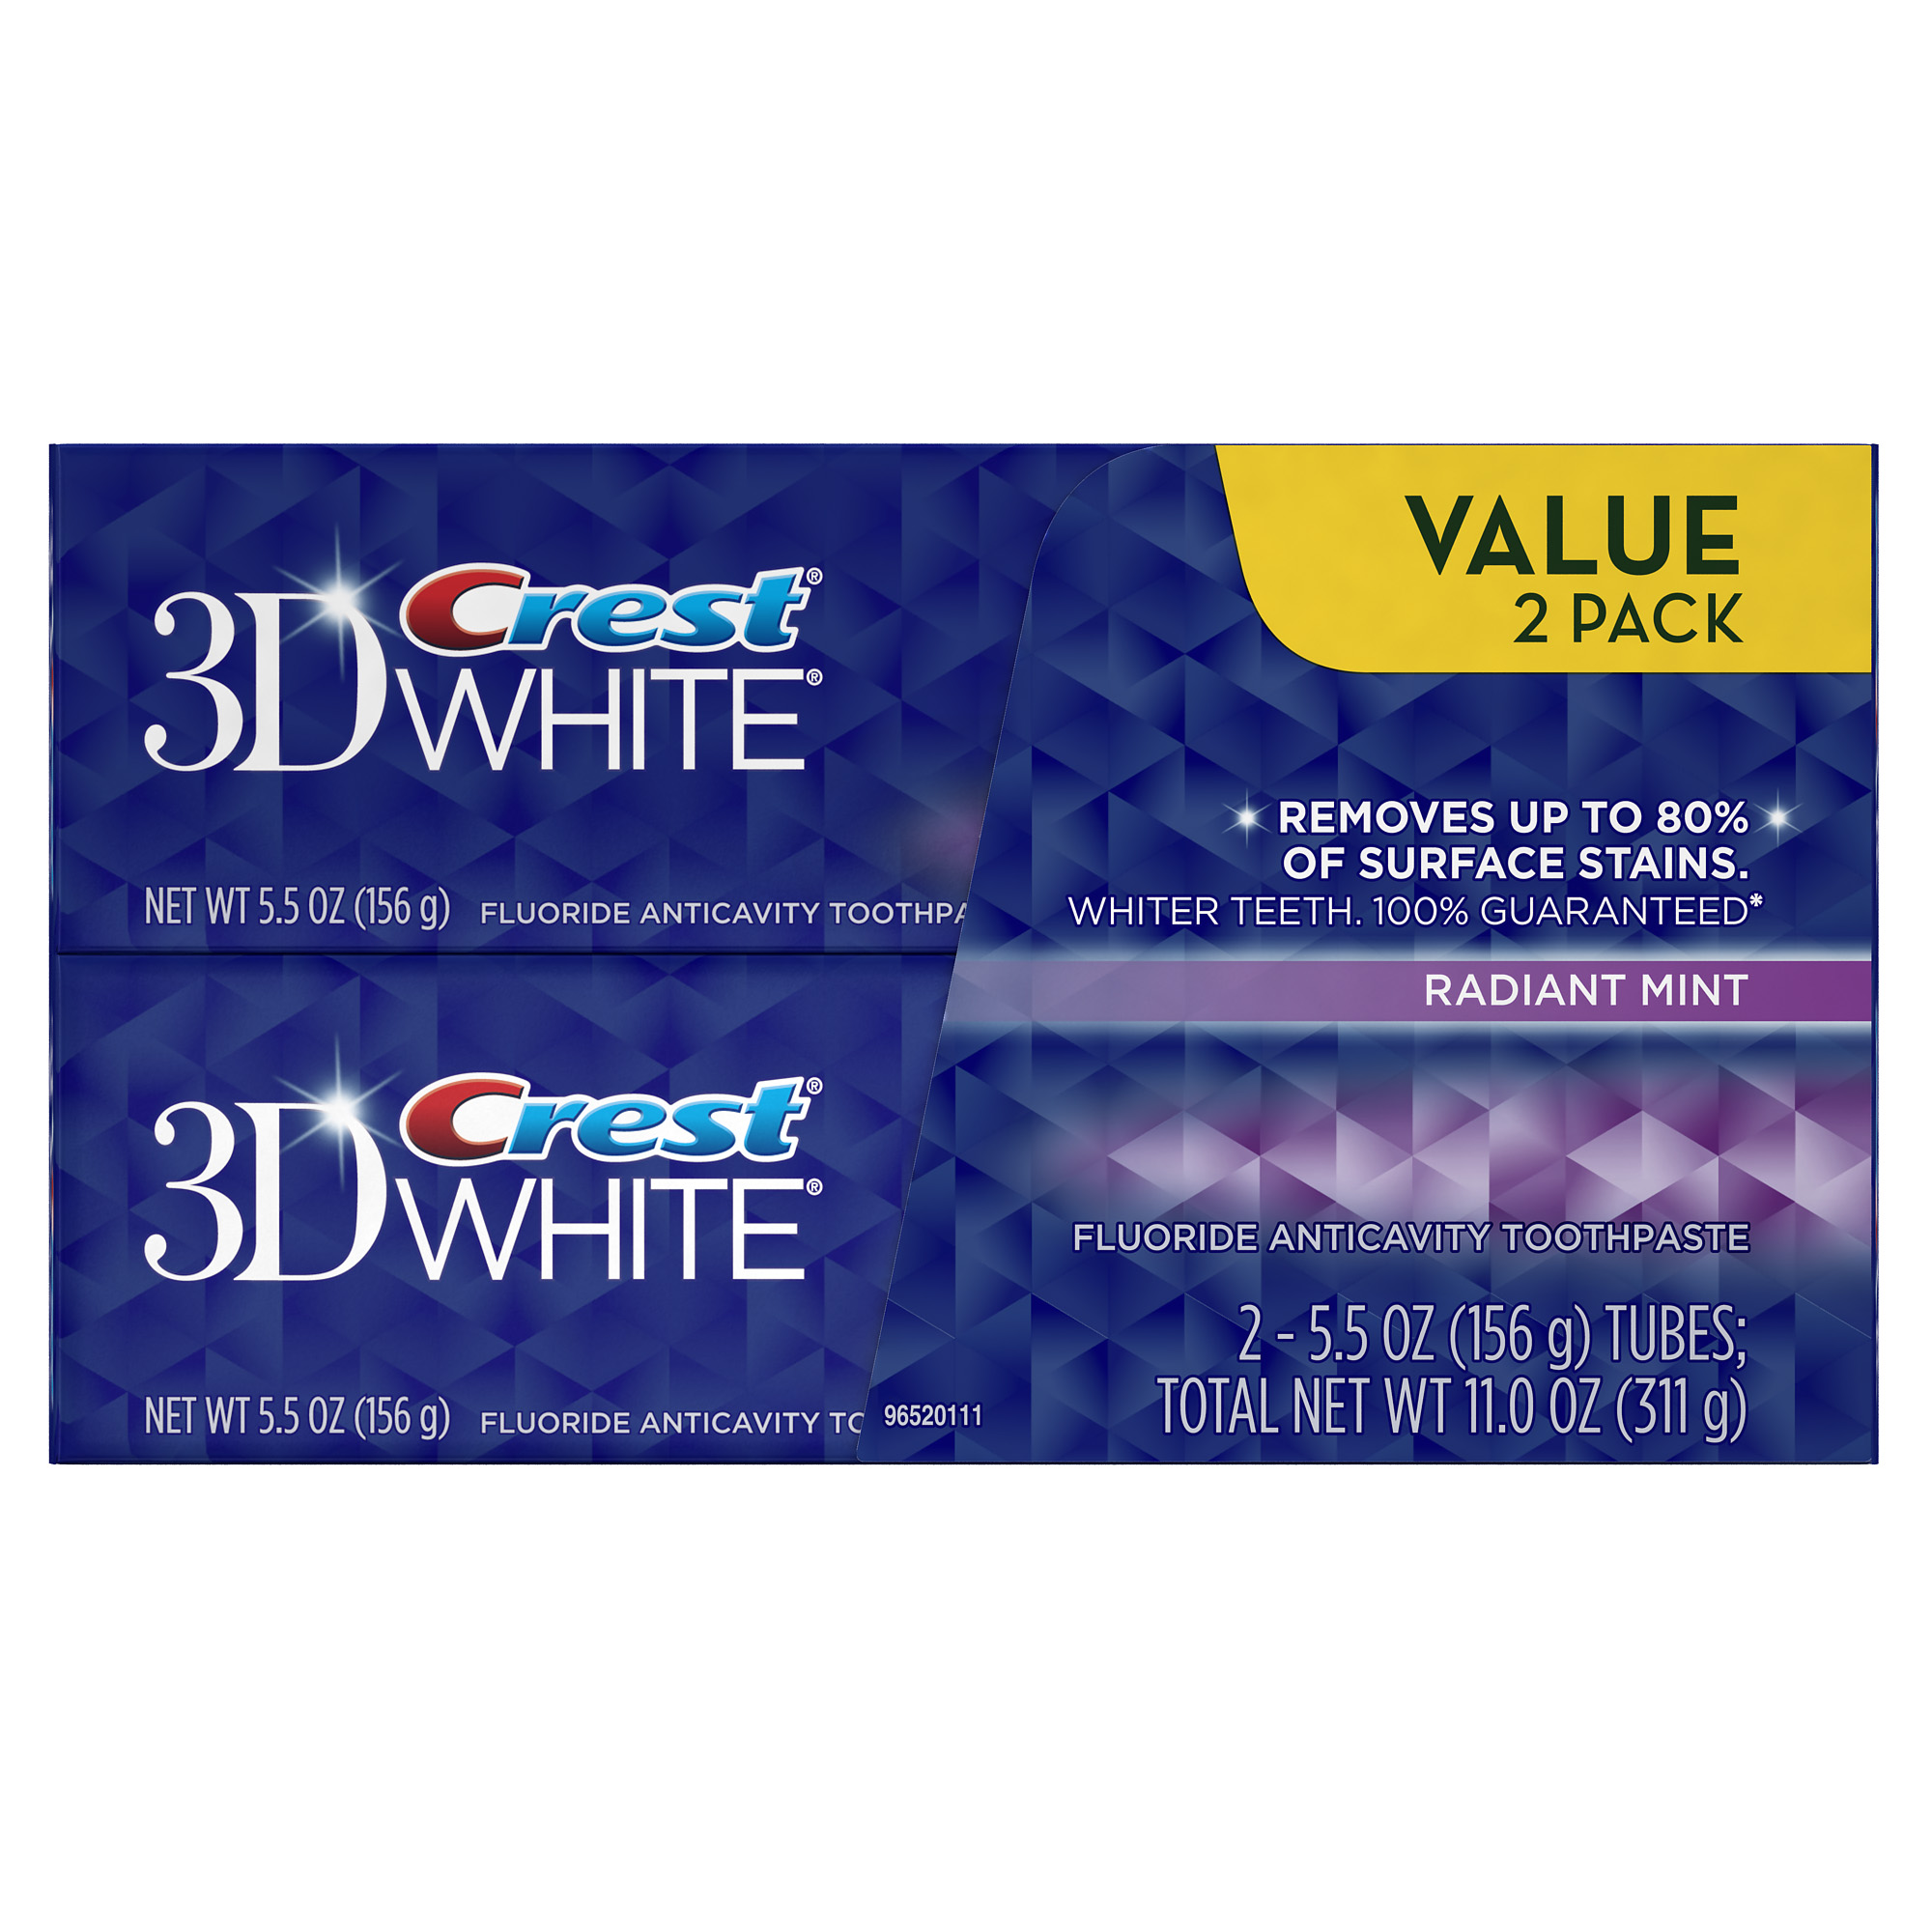 Crest 3D White Radiant Mint Flavor Whitening Toothpaste Twin Pack 11 Oz - image 1 of 11